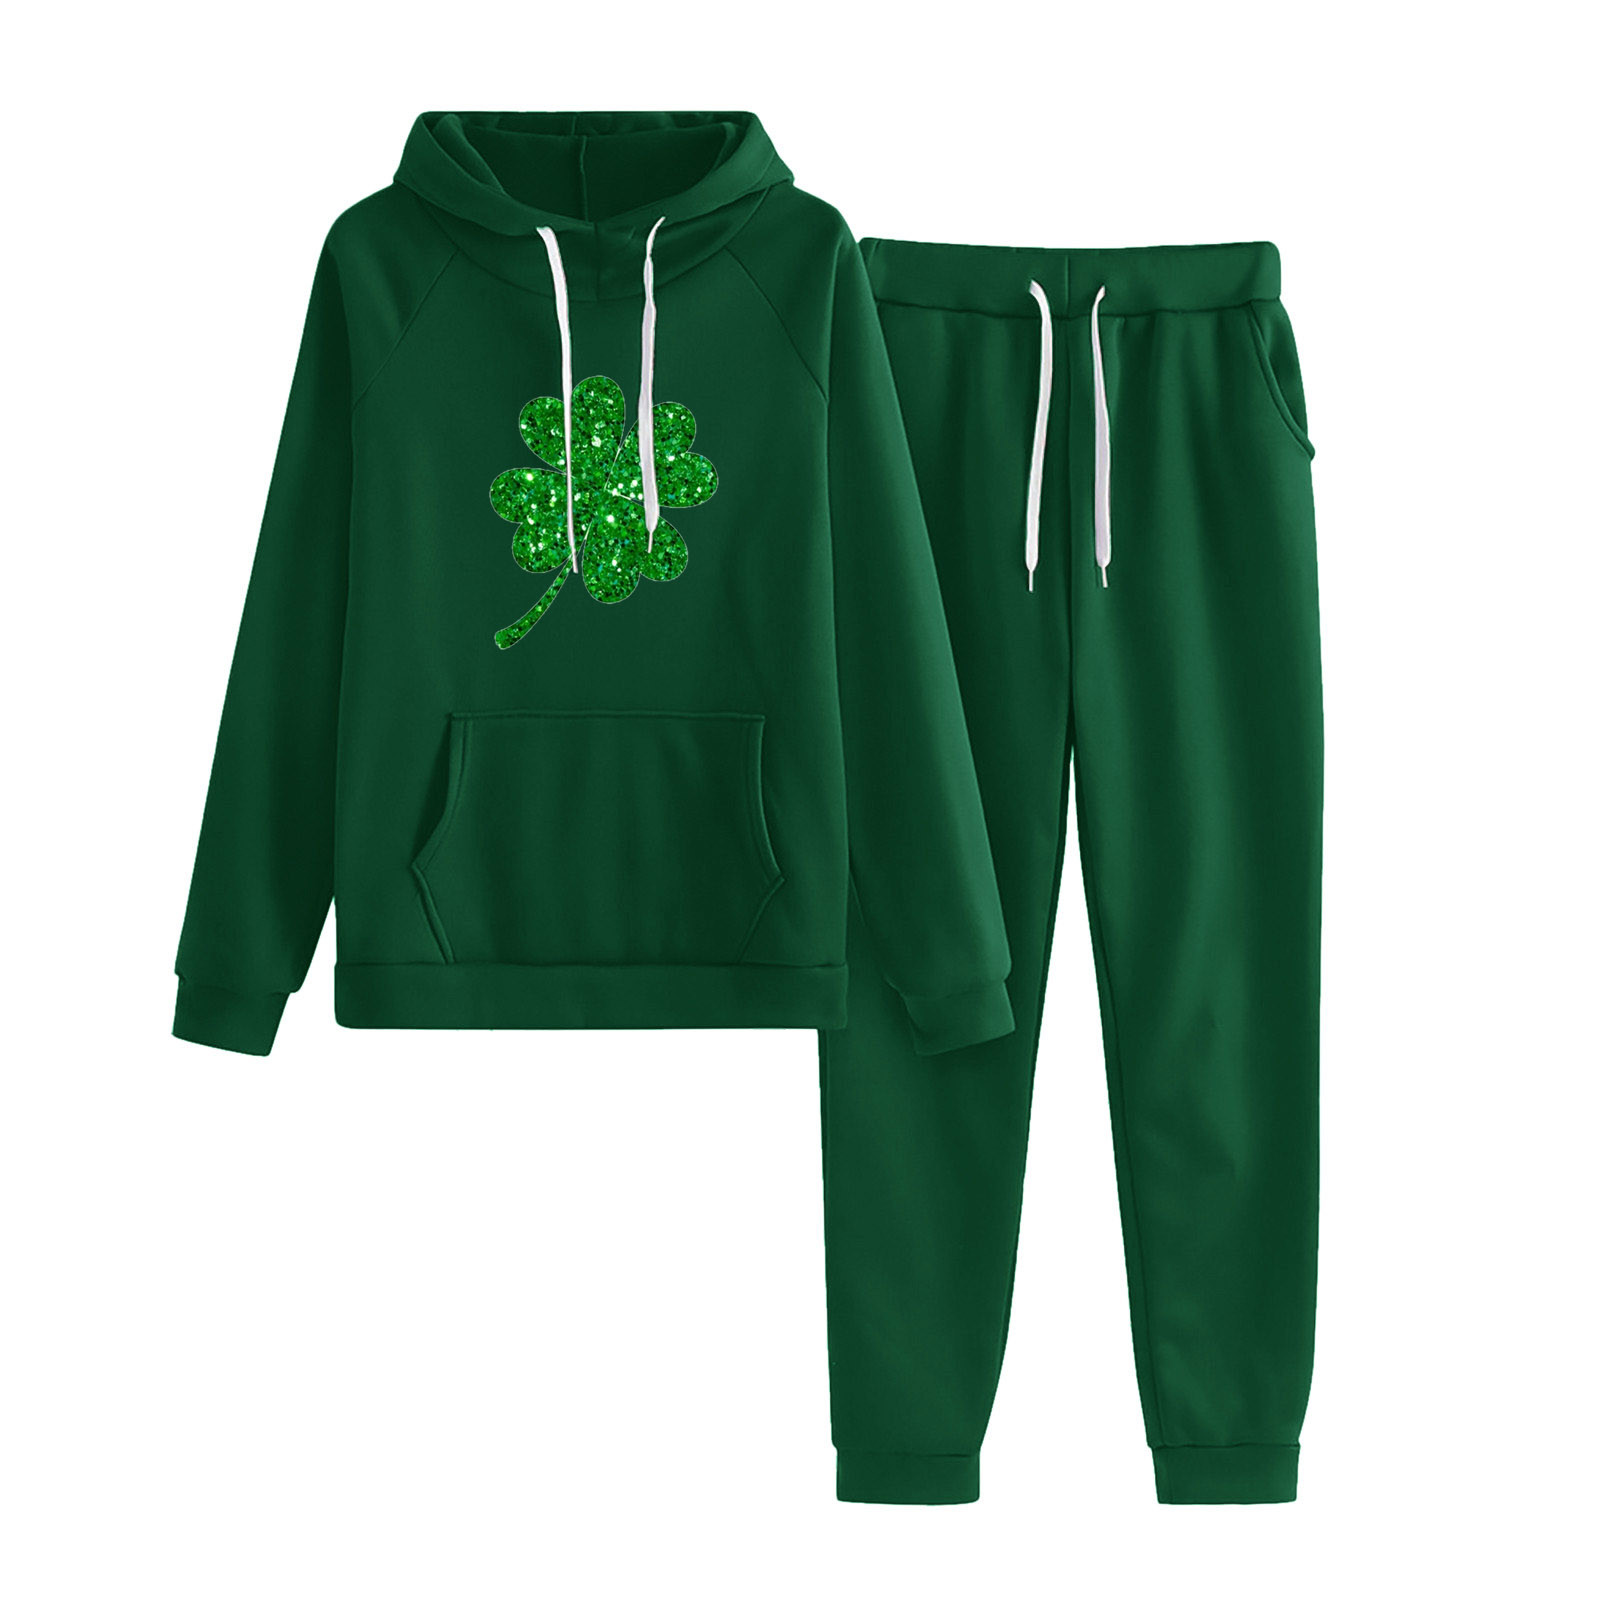 Besolor Womens St. Patrick's Day Sweatsuits 2 Piece Set Long Sleeve ...